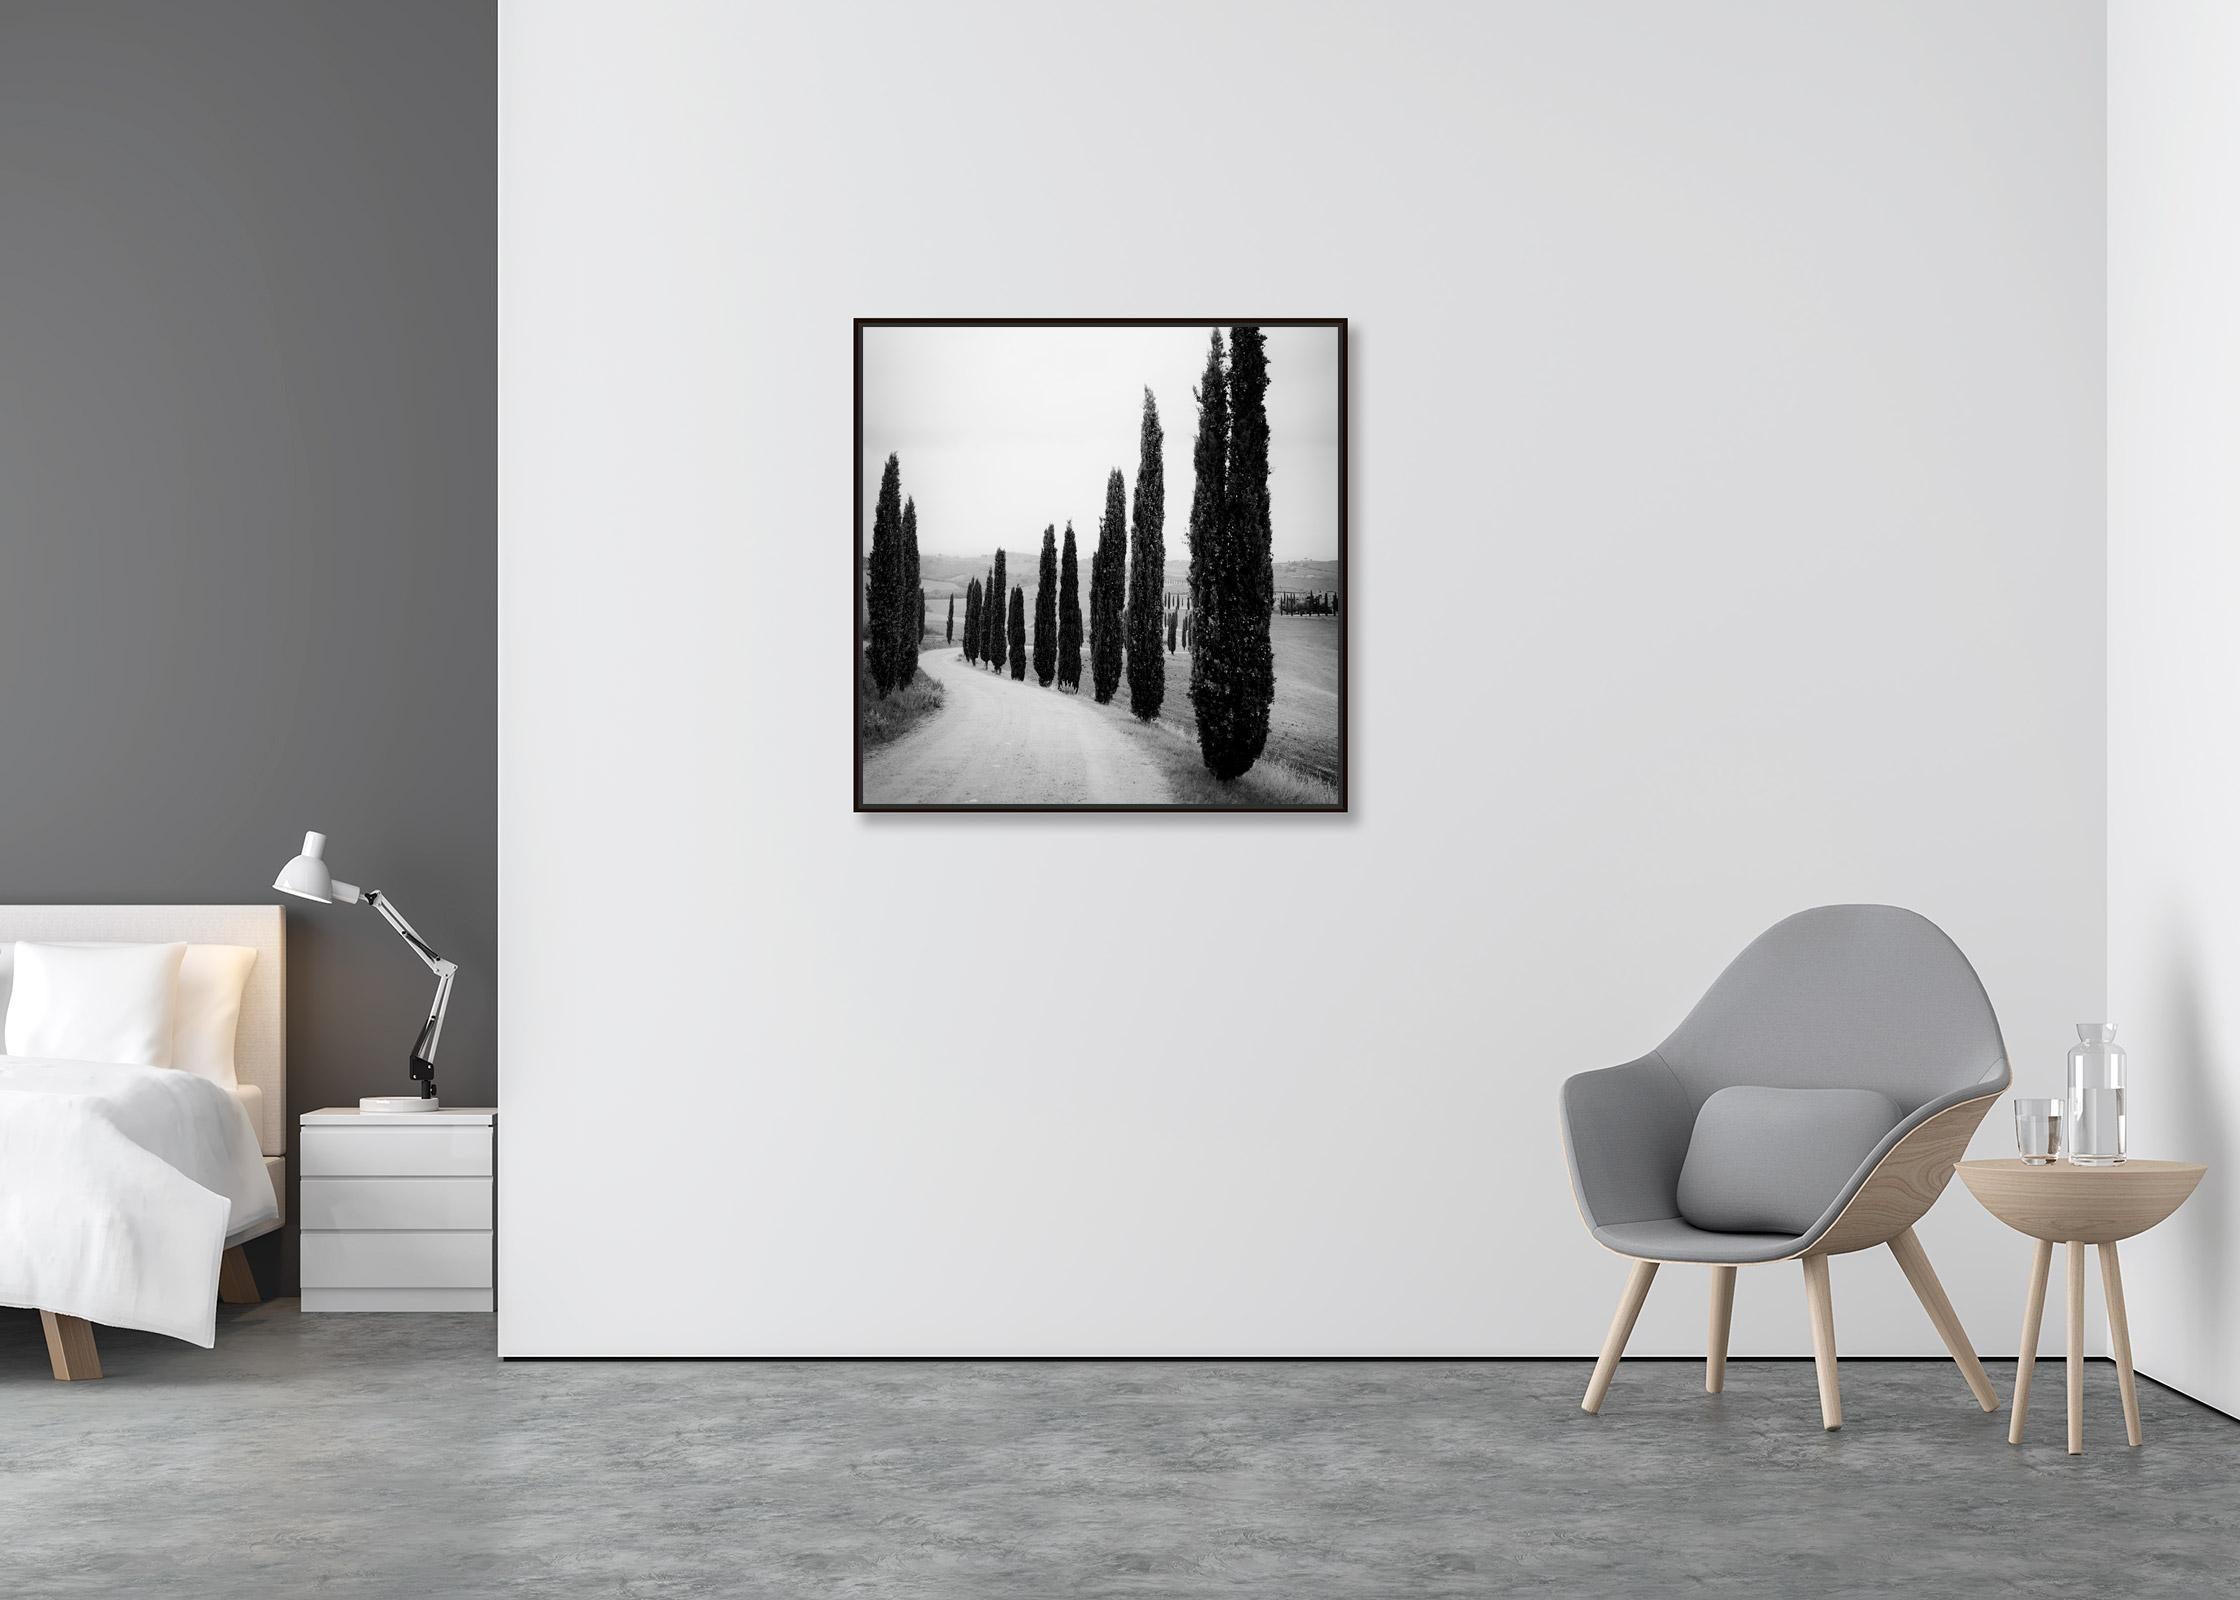 Cypress Trees, along the Road, Tuscany, black and white photography, landscape - Contemporary Photograph by Gerald Berghammer